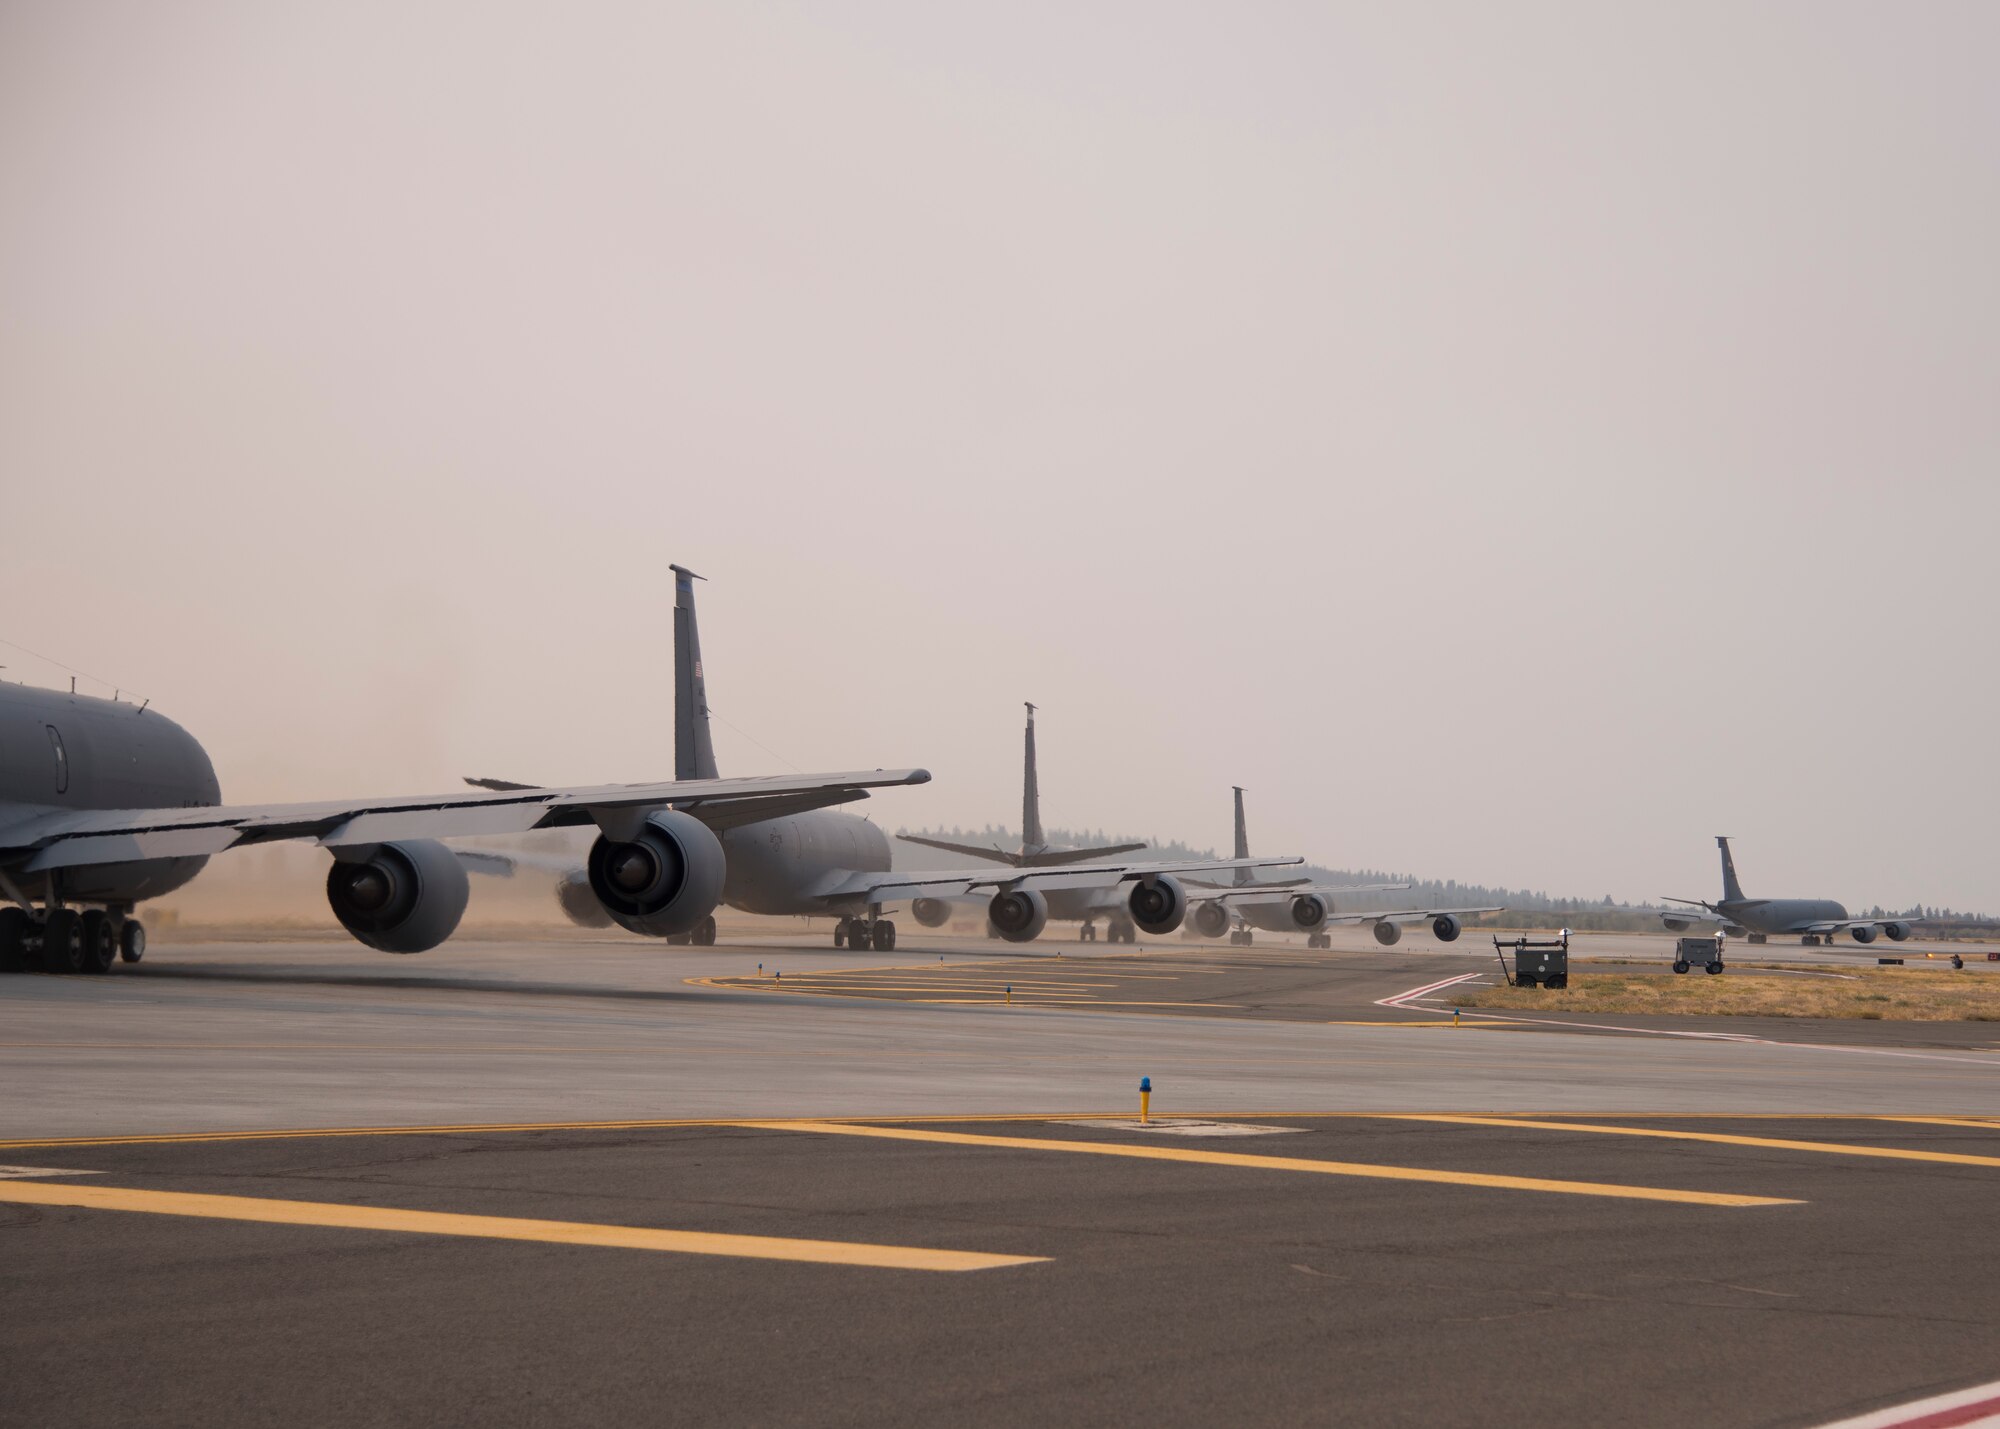 KC-135 Stratotankers line up to launch during a base exercise at Fairchild Air Force Base, Washington, Aug. 24, 2018. Fairchild’s KC-135 Stratotankers have been utilized for decades to extend the reach of fighters, bombers and other aircraft through aerial refueling. Because of this “air bridge,” U.S. and allied air power can be projected around the world 24/7, 365 days a year. (U.S. Air Force photo/Senior Airman Ryan Lackey)